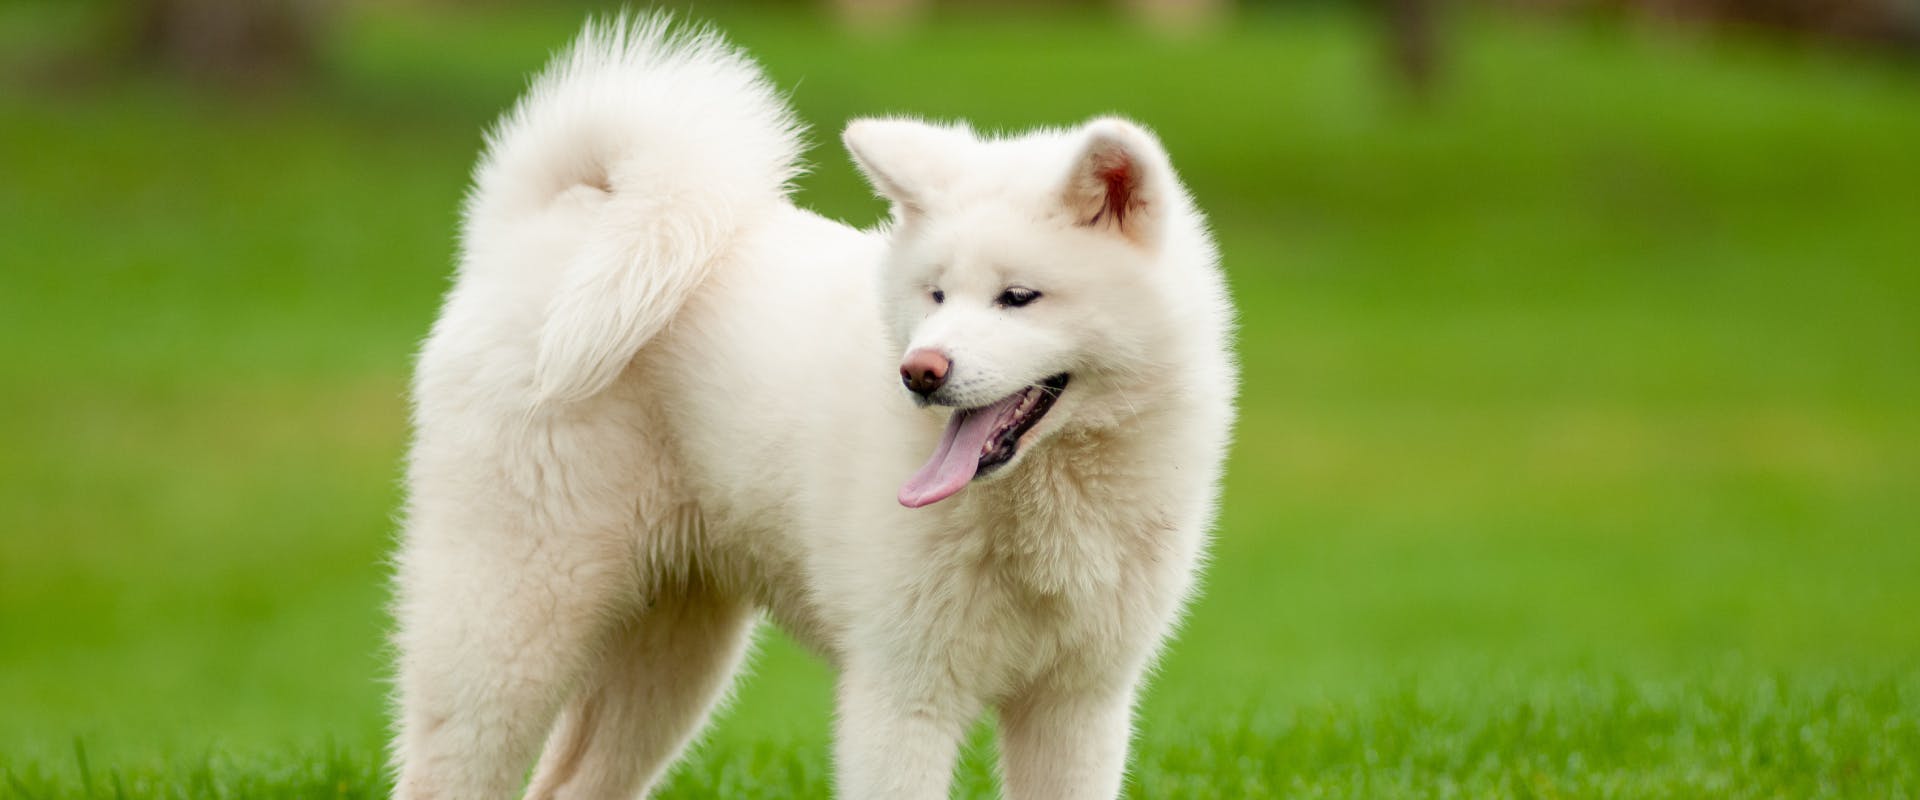 a white Japanese Akita stood in a grassy park panting